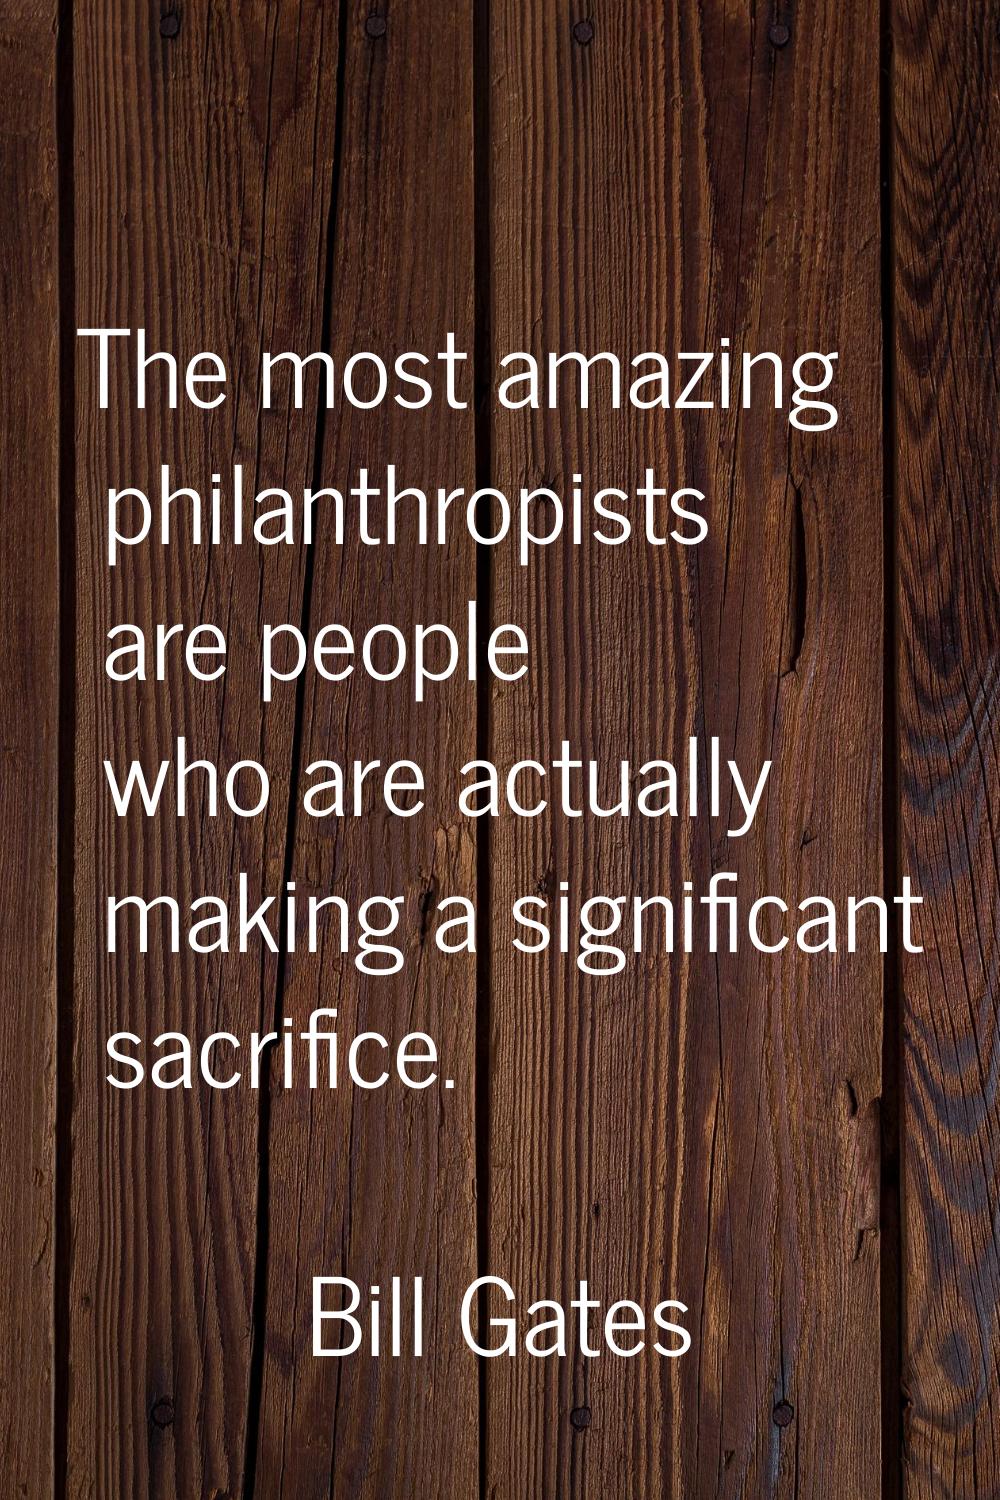 The most amazing philanthropists are people who are actually making a significant sacrifice.